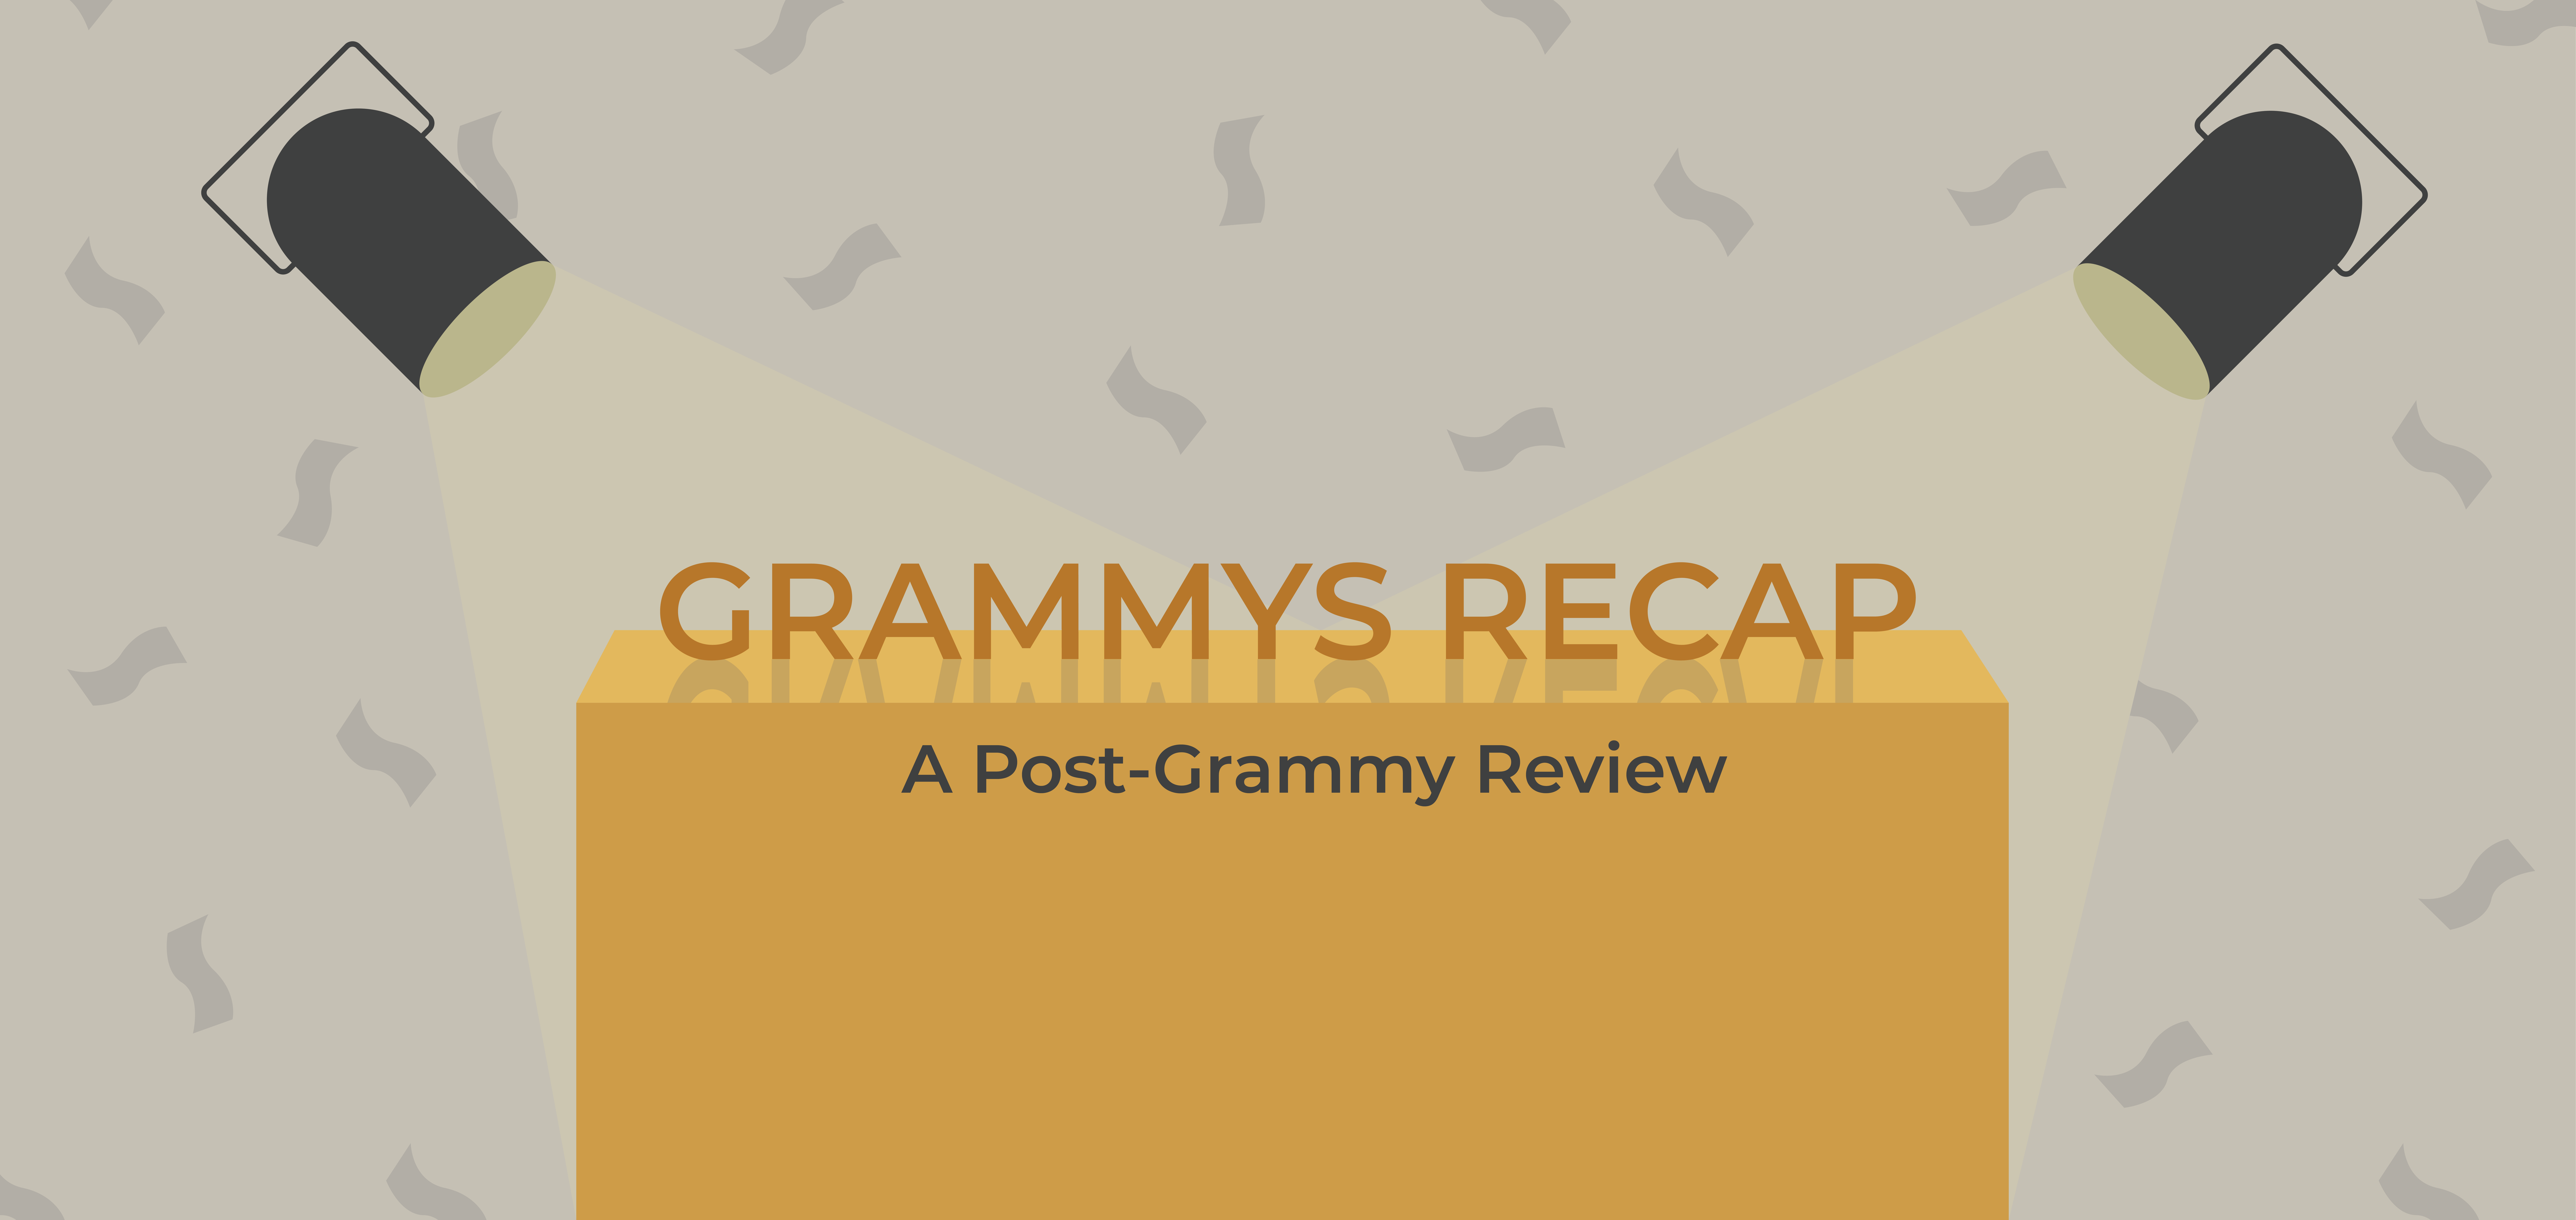 Grammys 2019 Recap: The Year of the Woman